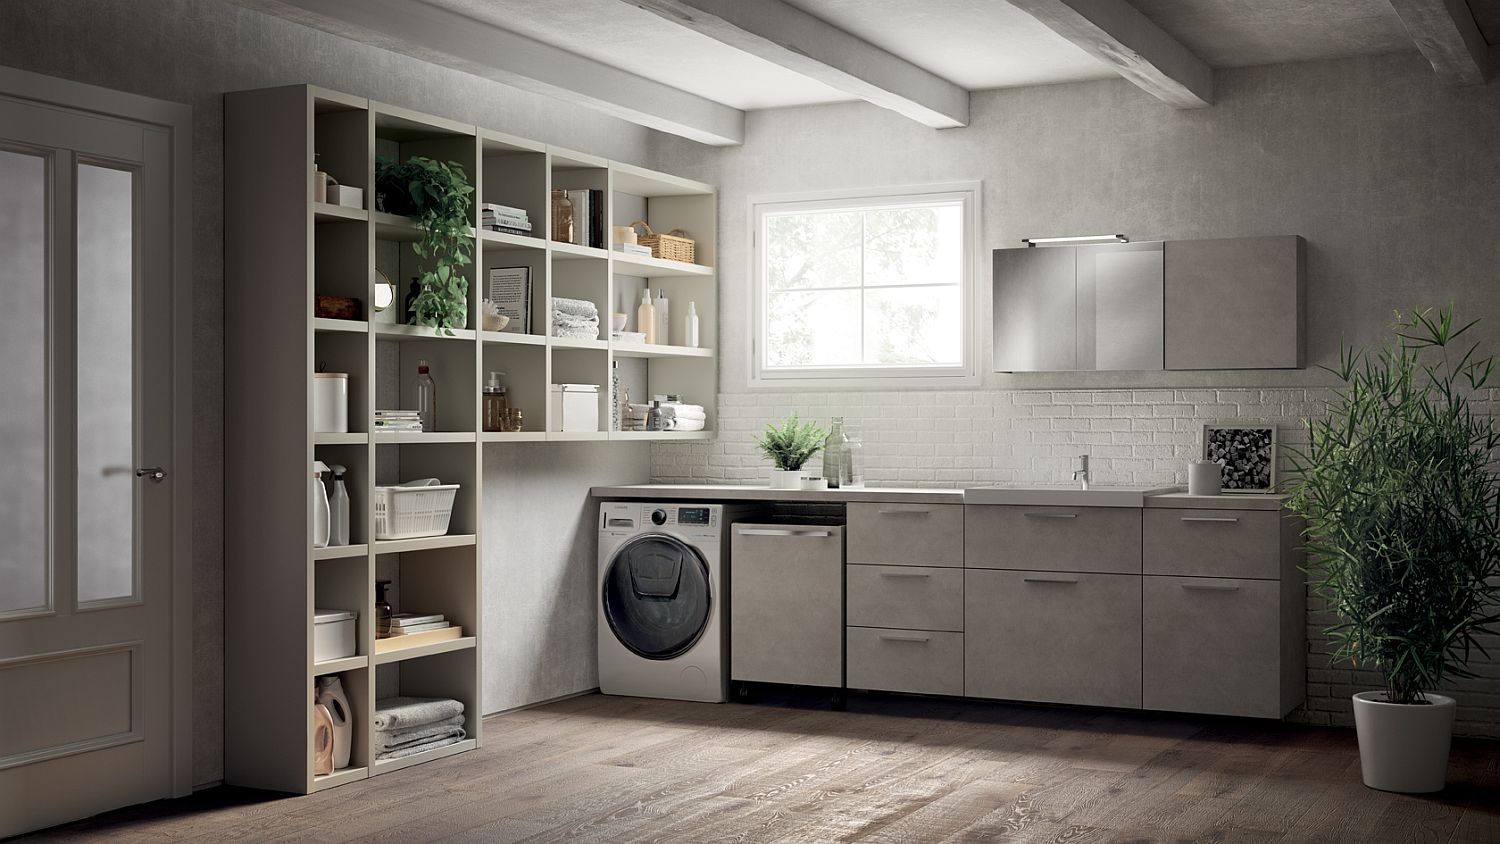 Fluida-wall-system-combined-with-refined-bathroom-setting-and-smart-laundry-space